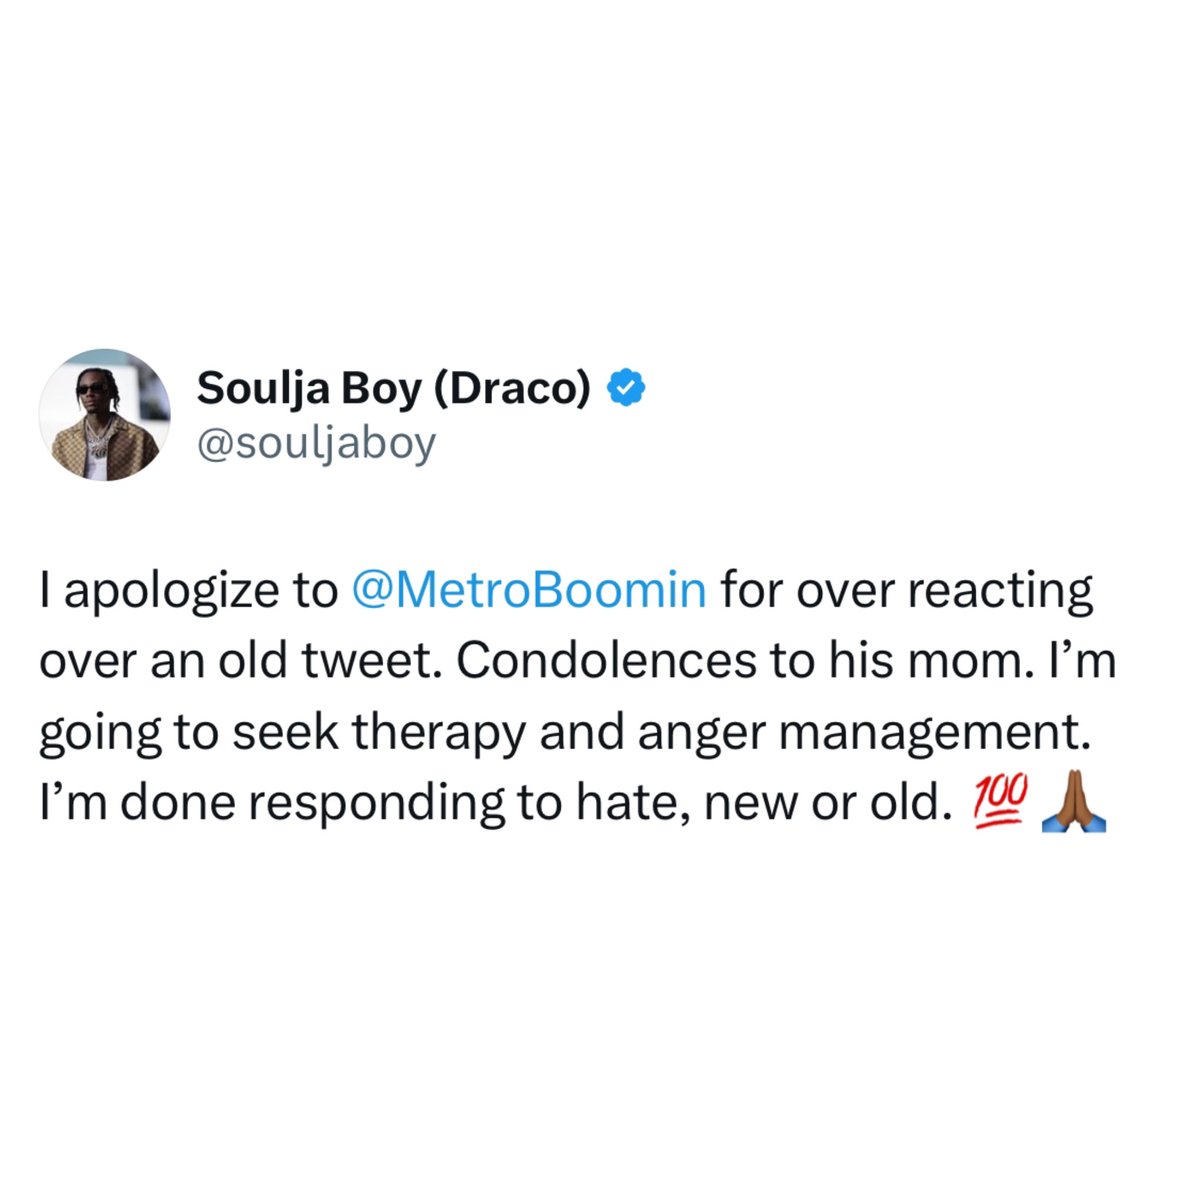 Soulja Boy issues an apology to Metro Boomin